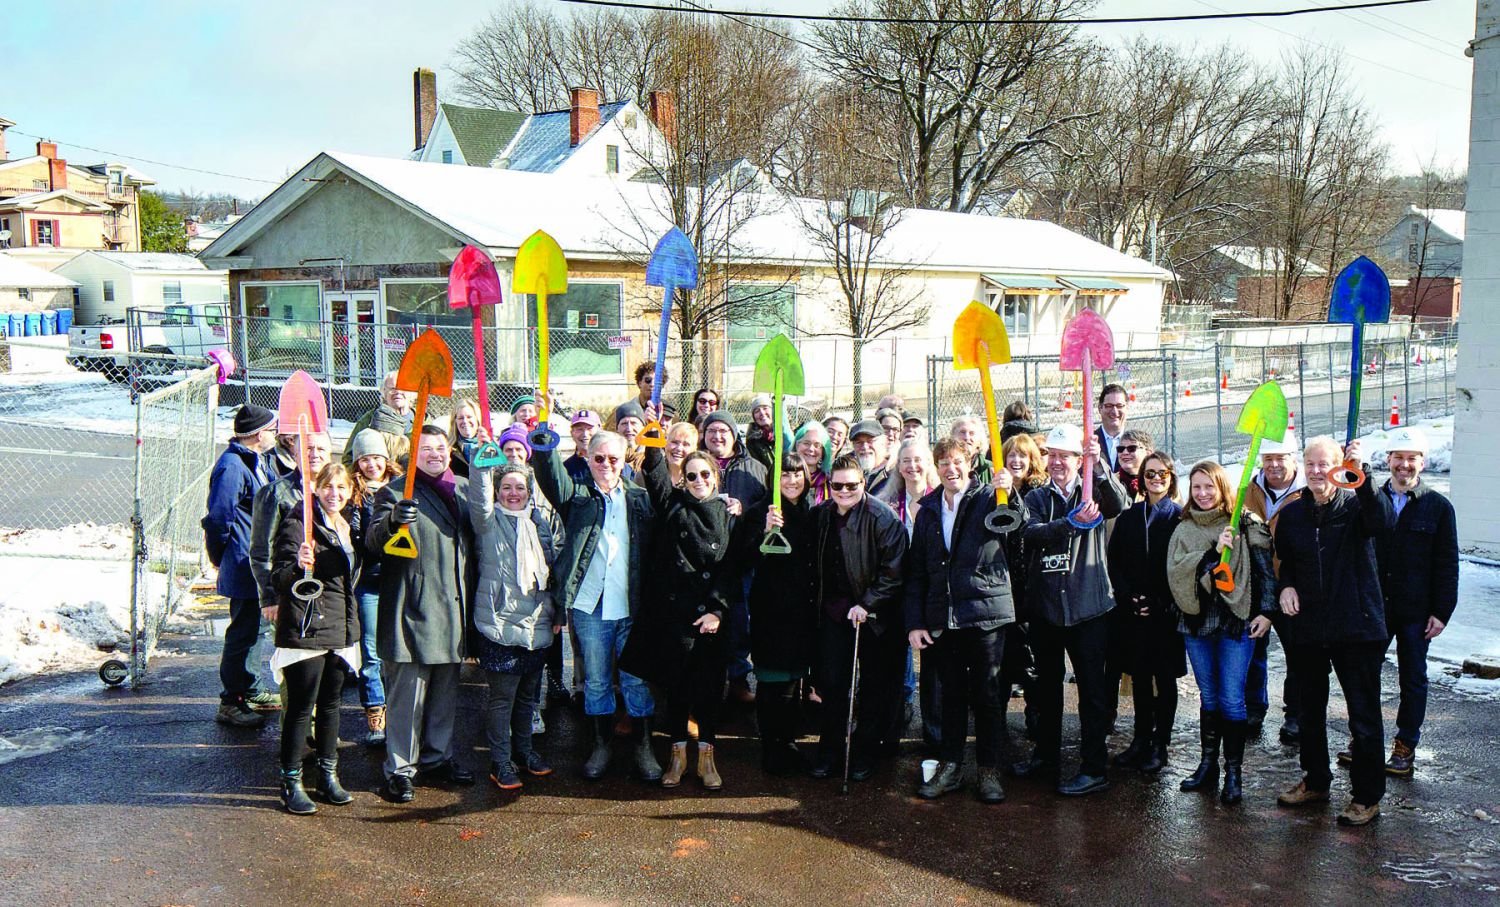 Holding painted cardboard shovels aloft, officials are joined by ArtYard staff and well wishers at the groundbreaking for a new arts center Monday.  Photograph by Paul Warchol and courtesy of ArtYard.